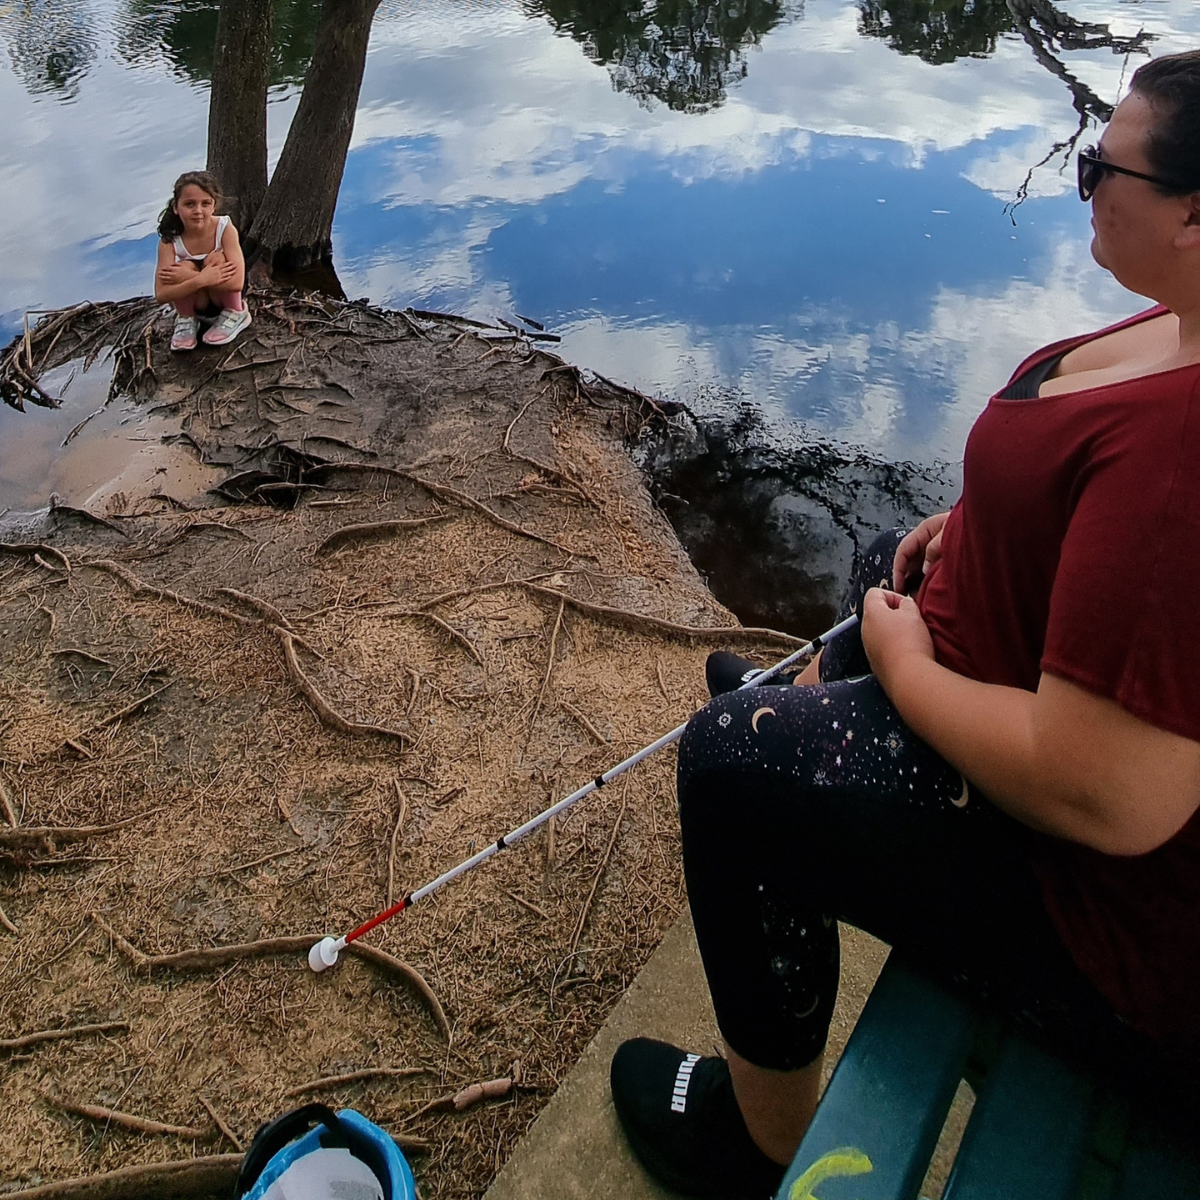 "Sarah sitting by a lake, white cane in hand, with one of her kids sat nearby leaning on a tree "